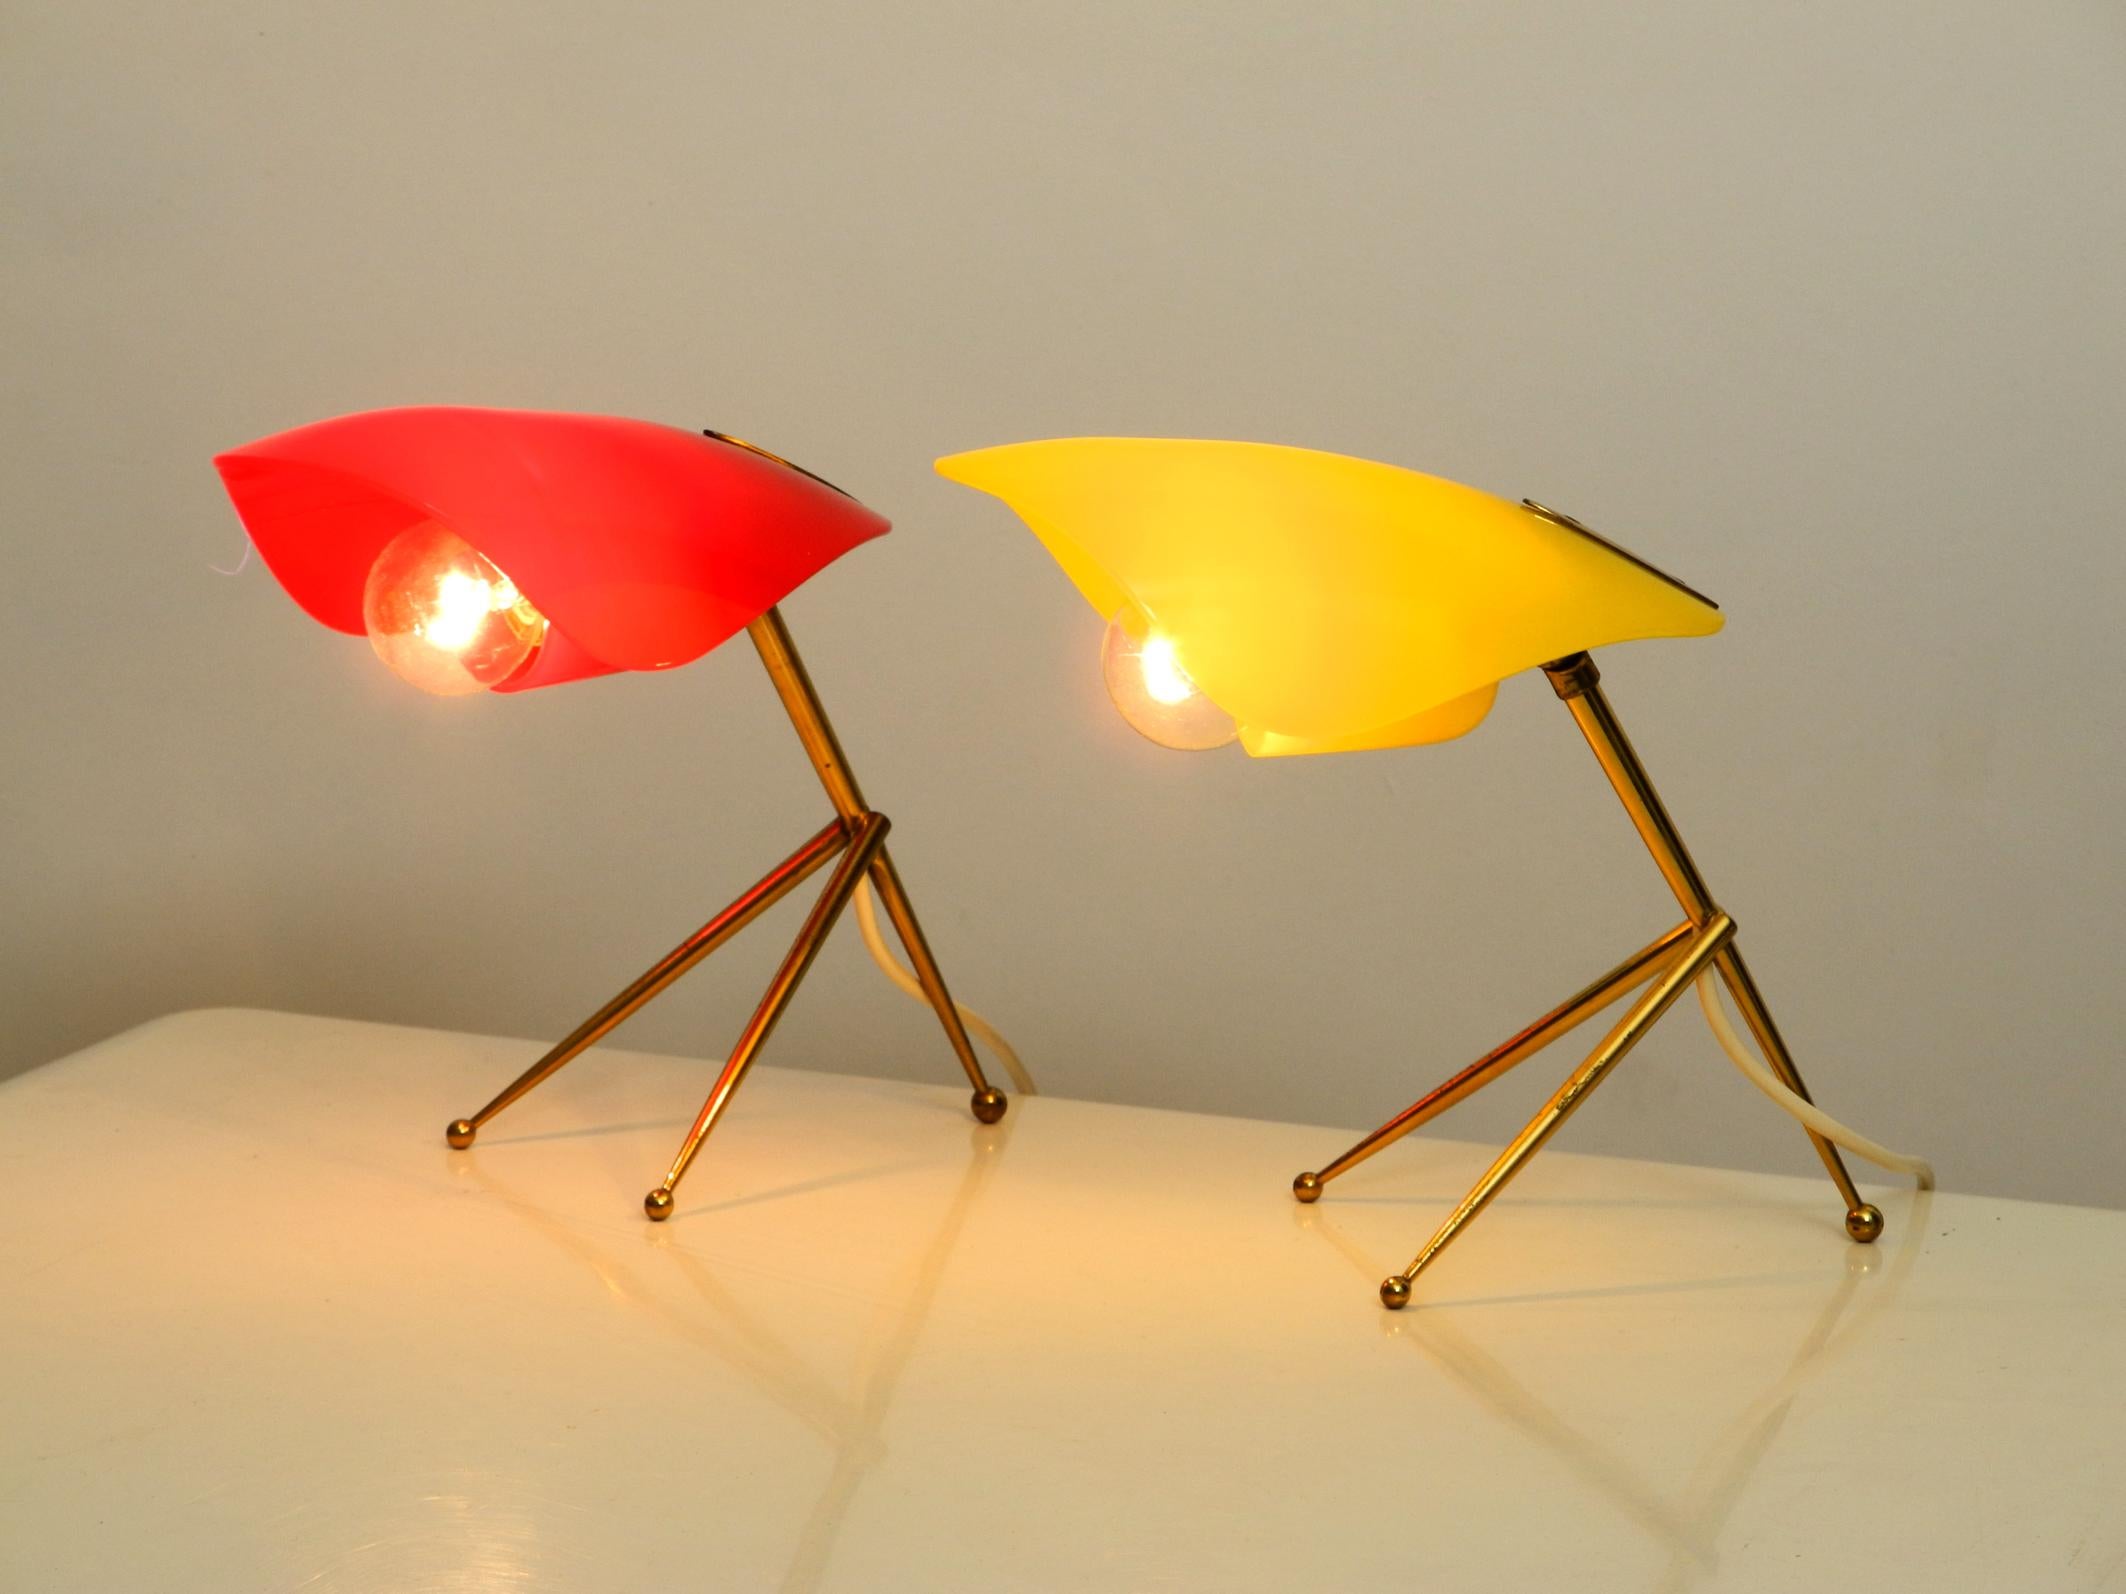 Pair of Rare Midcentury Table Lamps by WKR Germany with Plexiglass Lampshades For Sale 5